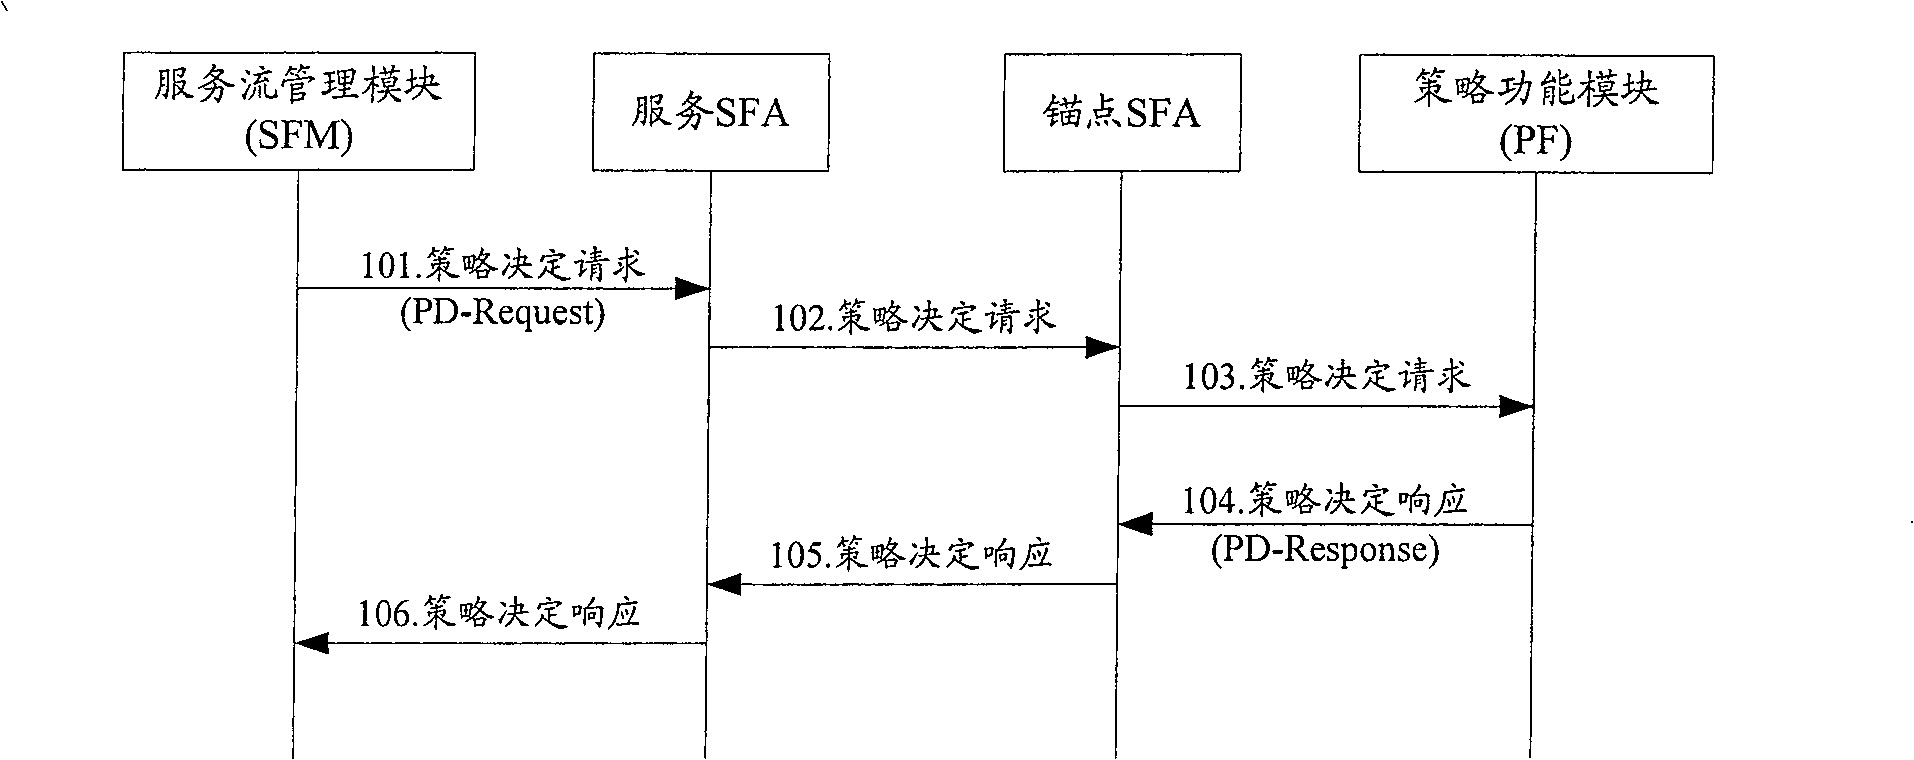 Process for implementing strategy determination and resource reservation in WiMAX network